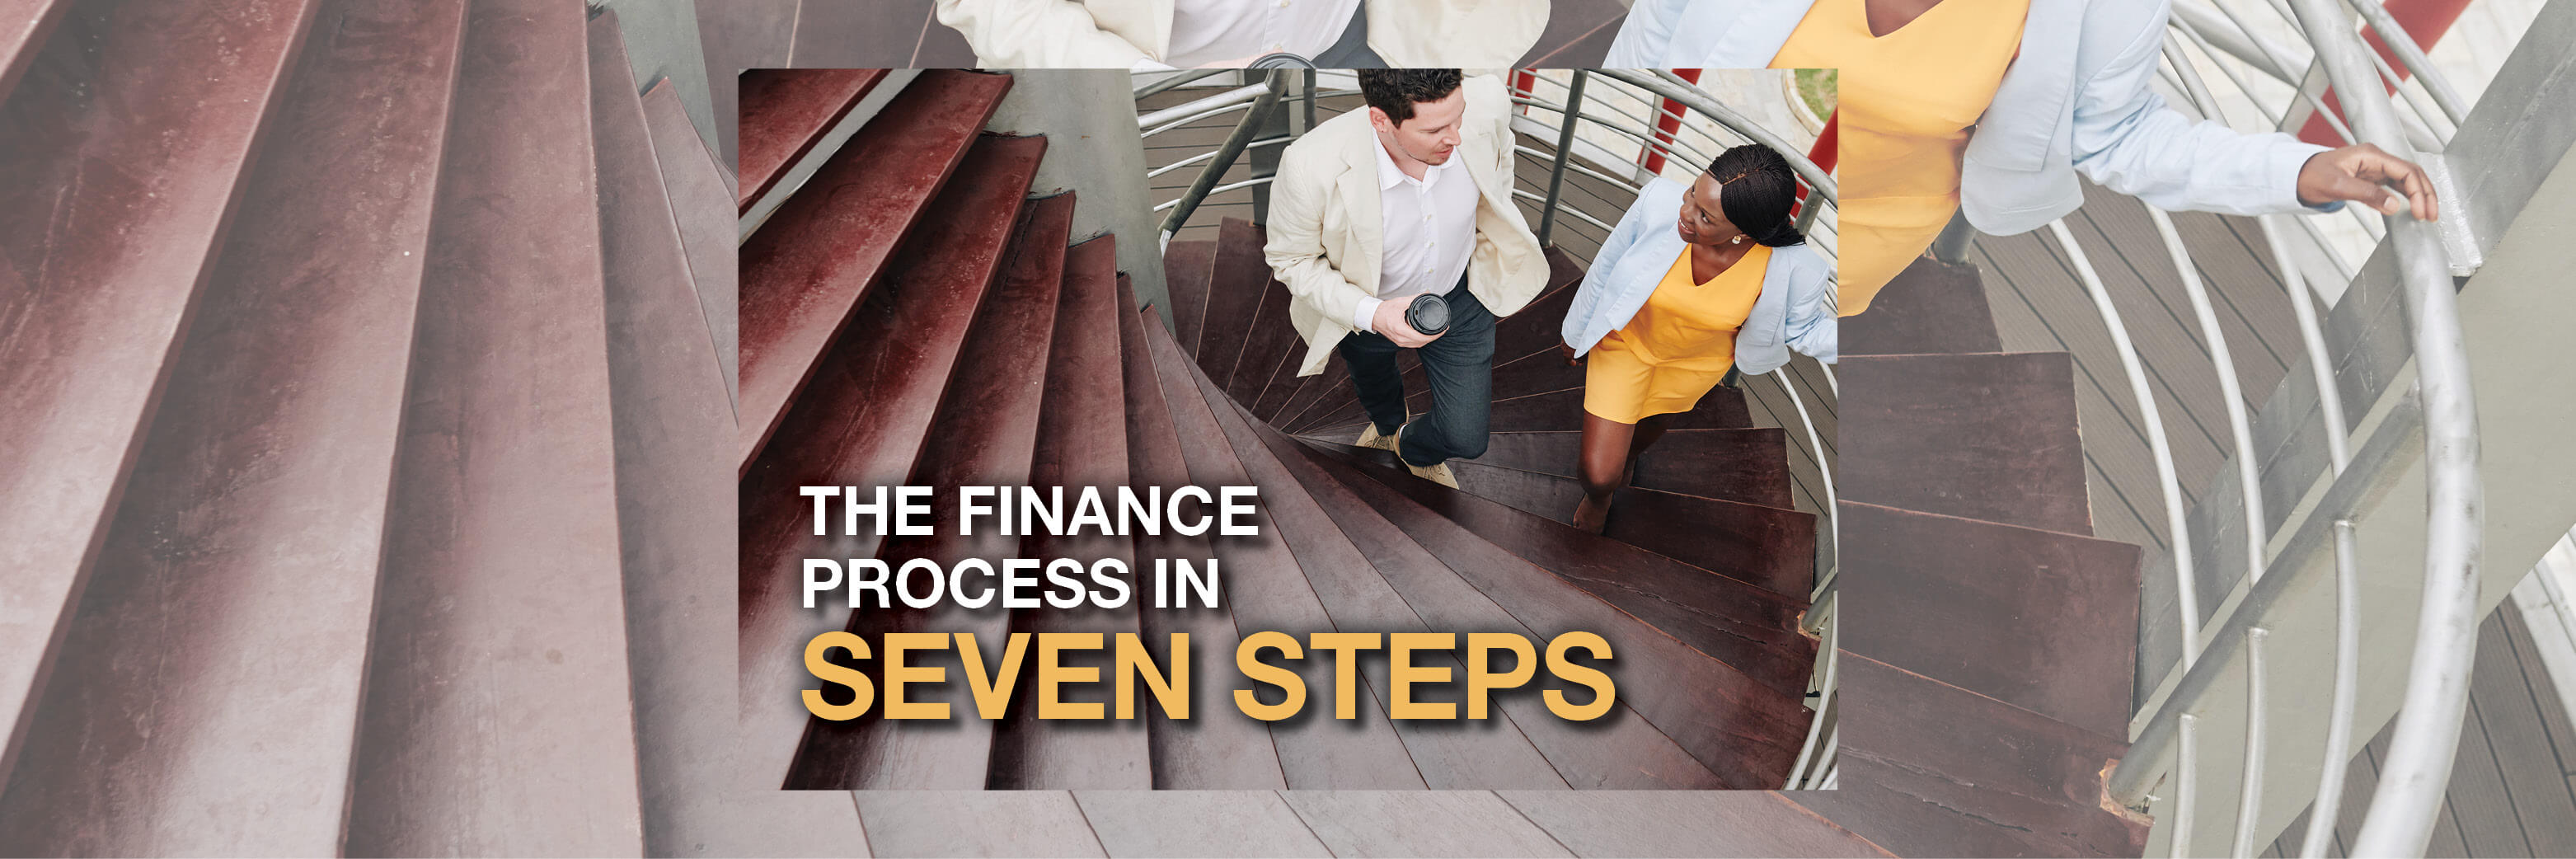 The Finance Process in 7 Steps: How to Offer Financing to My Customers